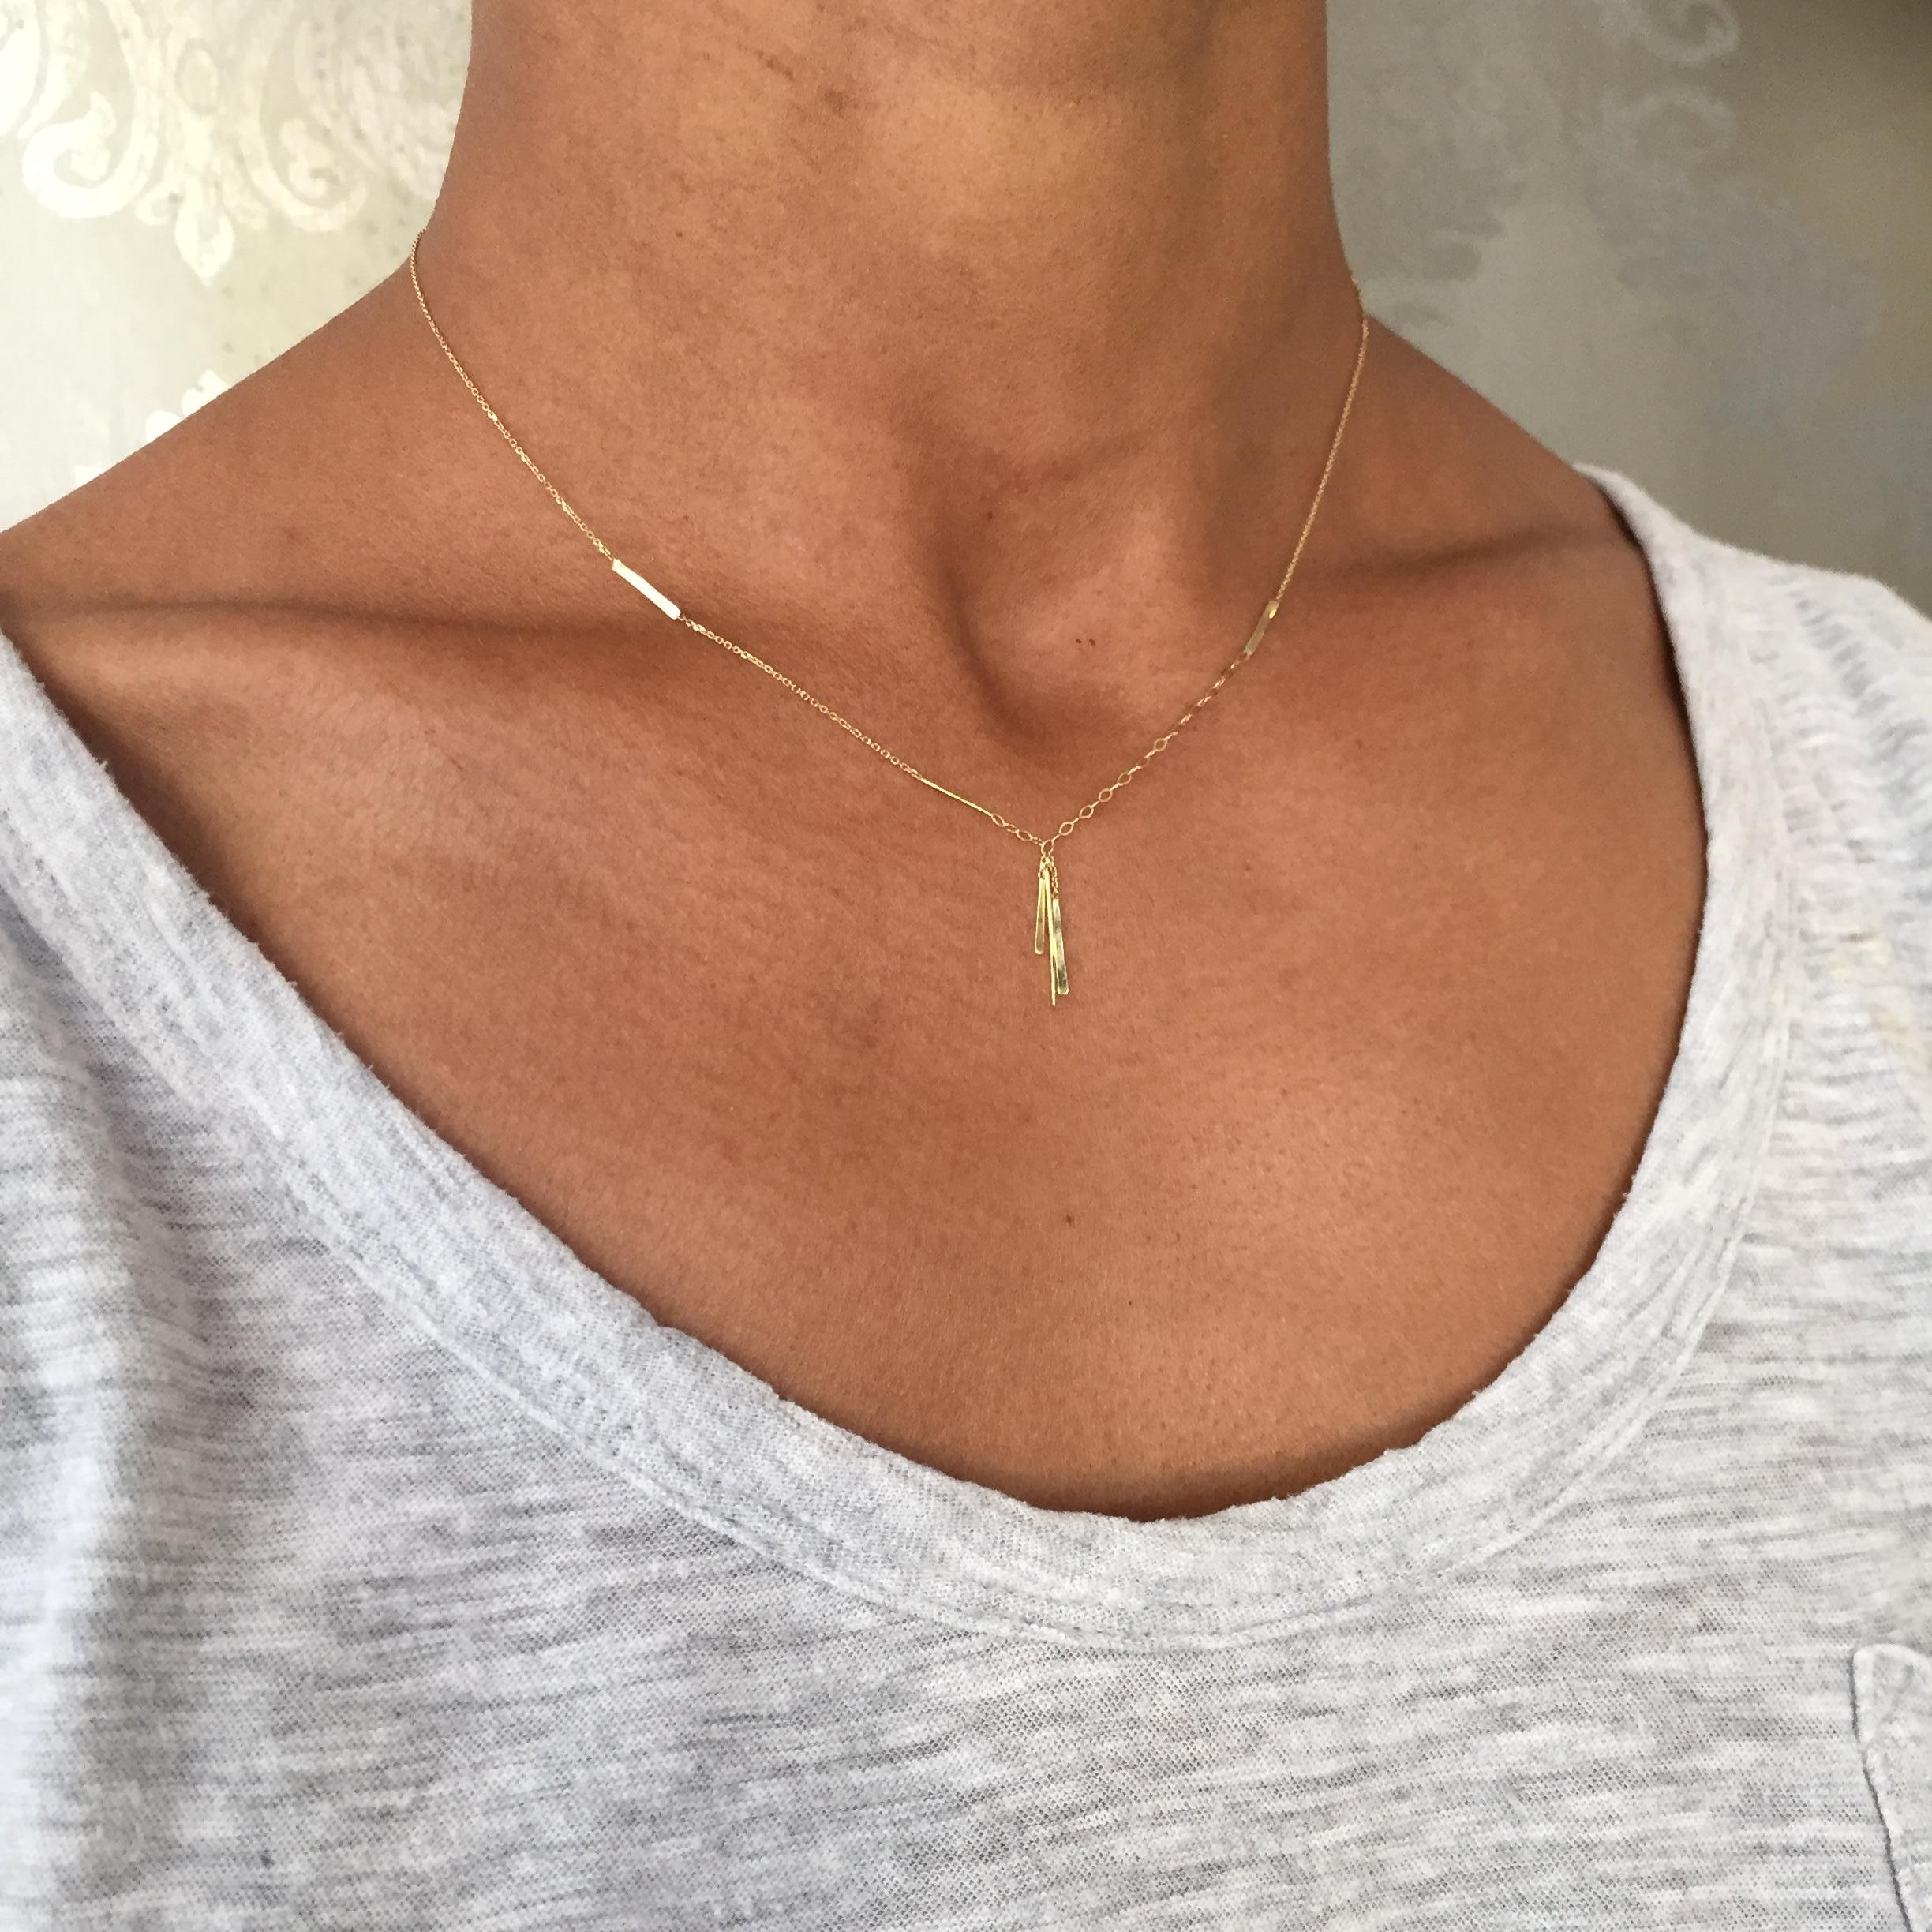 Sweet Pea Sycamore 18k Yellow Gold Necklace With Hanging Bar Details In New Condition For Sale In London, GB